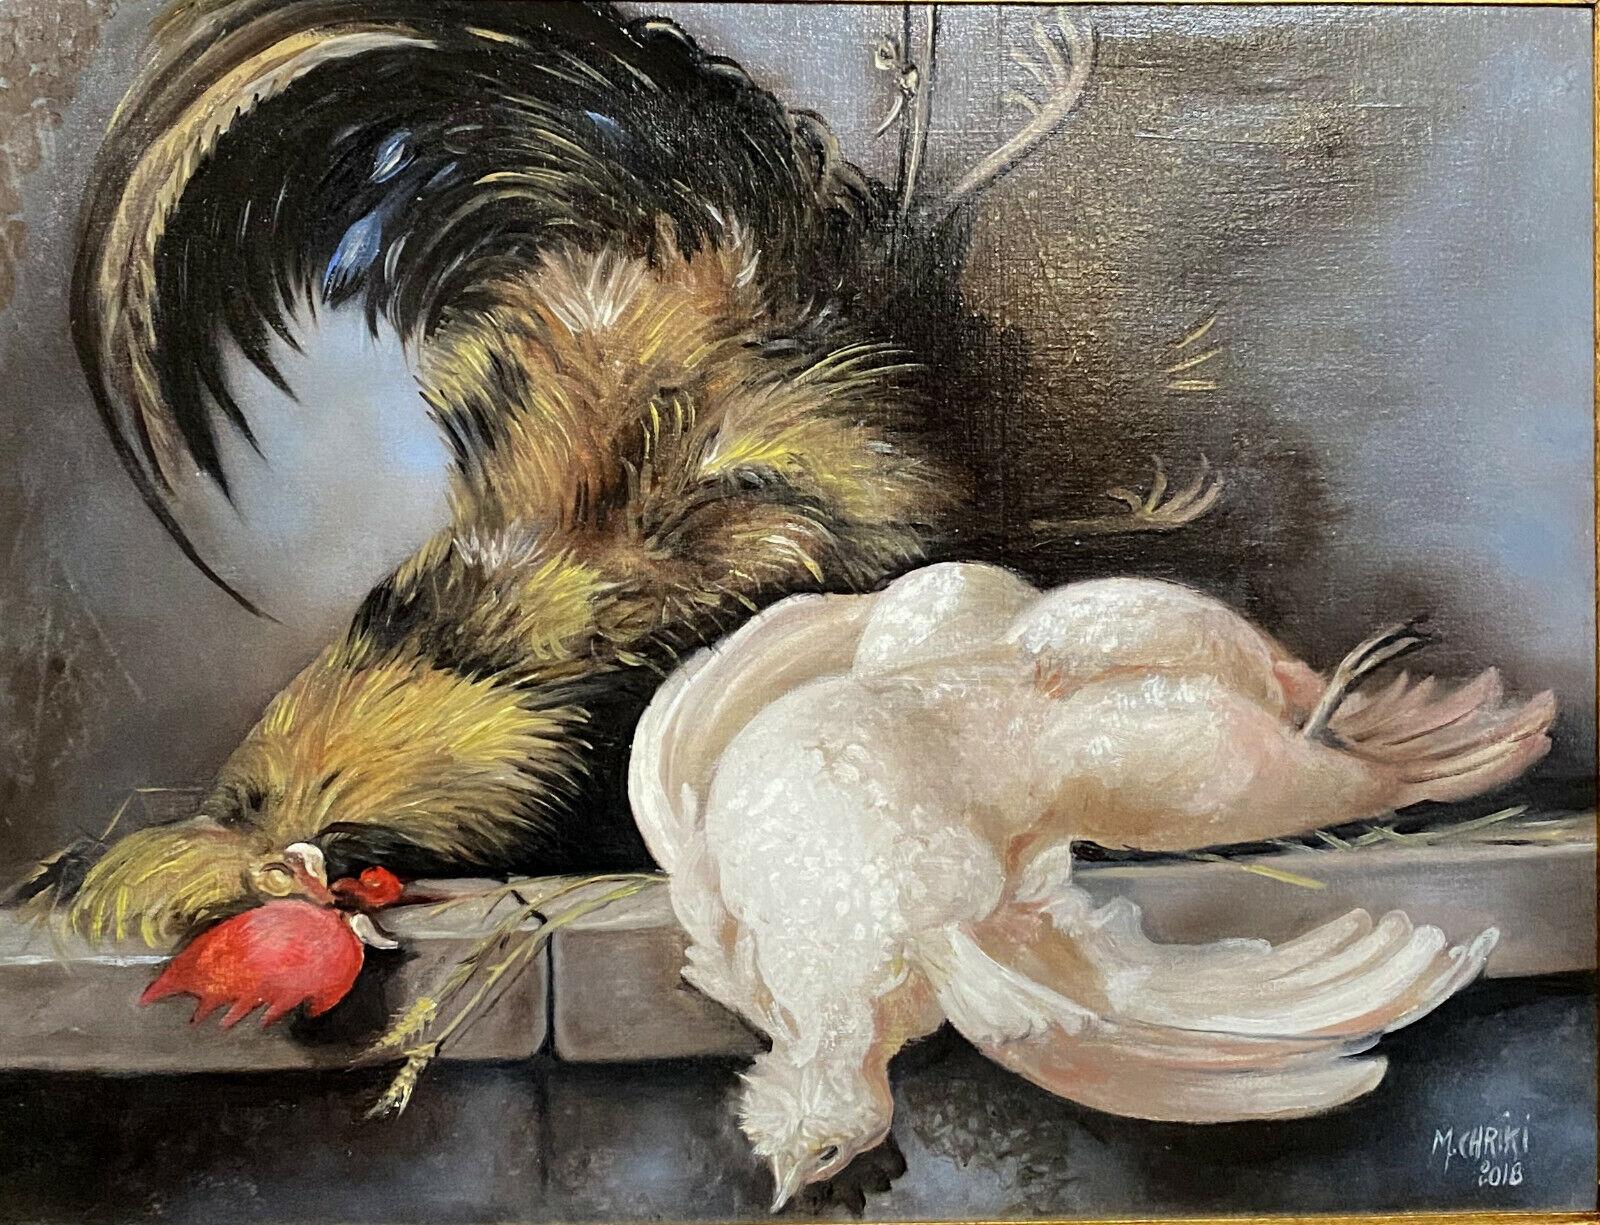 Explore the captivating world of orientalism with this Still Life Oil Painting by Moulay Yacoub de Chriki, a renowned artist of the 20th/21st century. This exquisite piece features a vibrant depiction of a still life scene with chickens, signed and